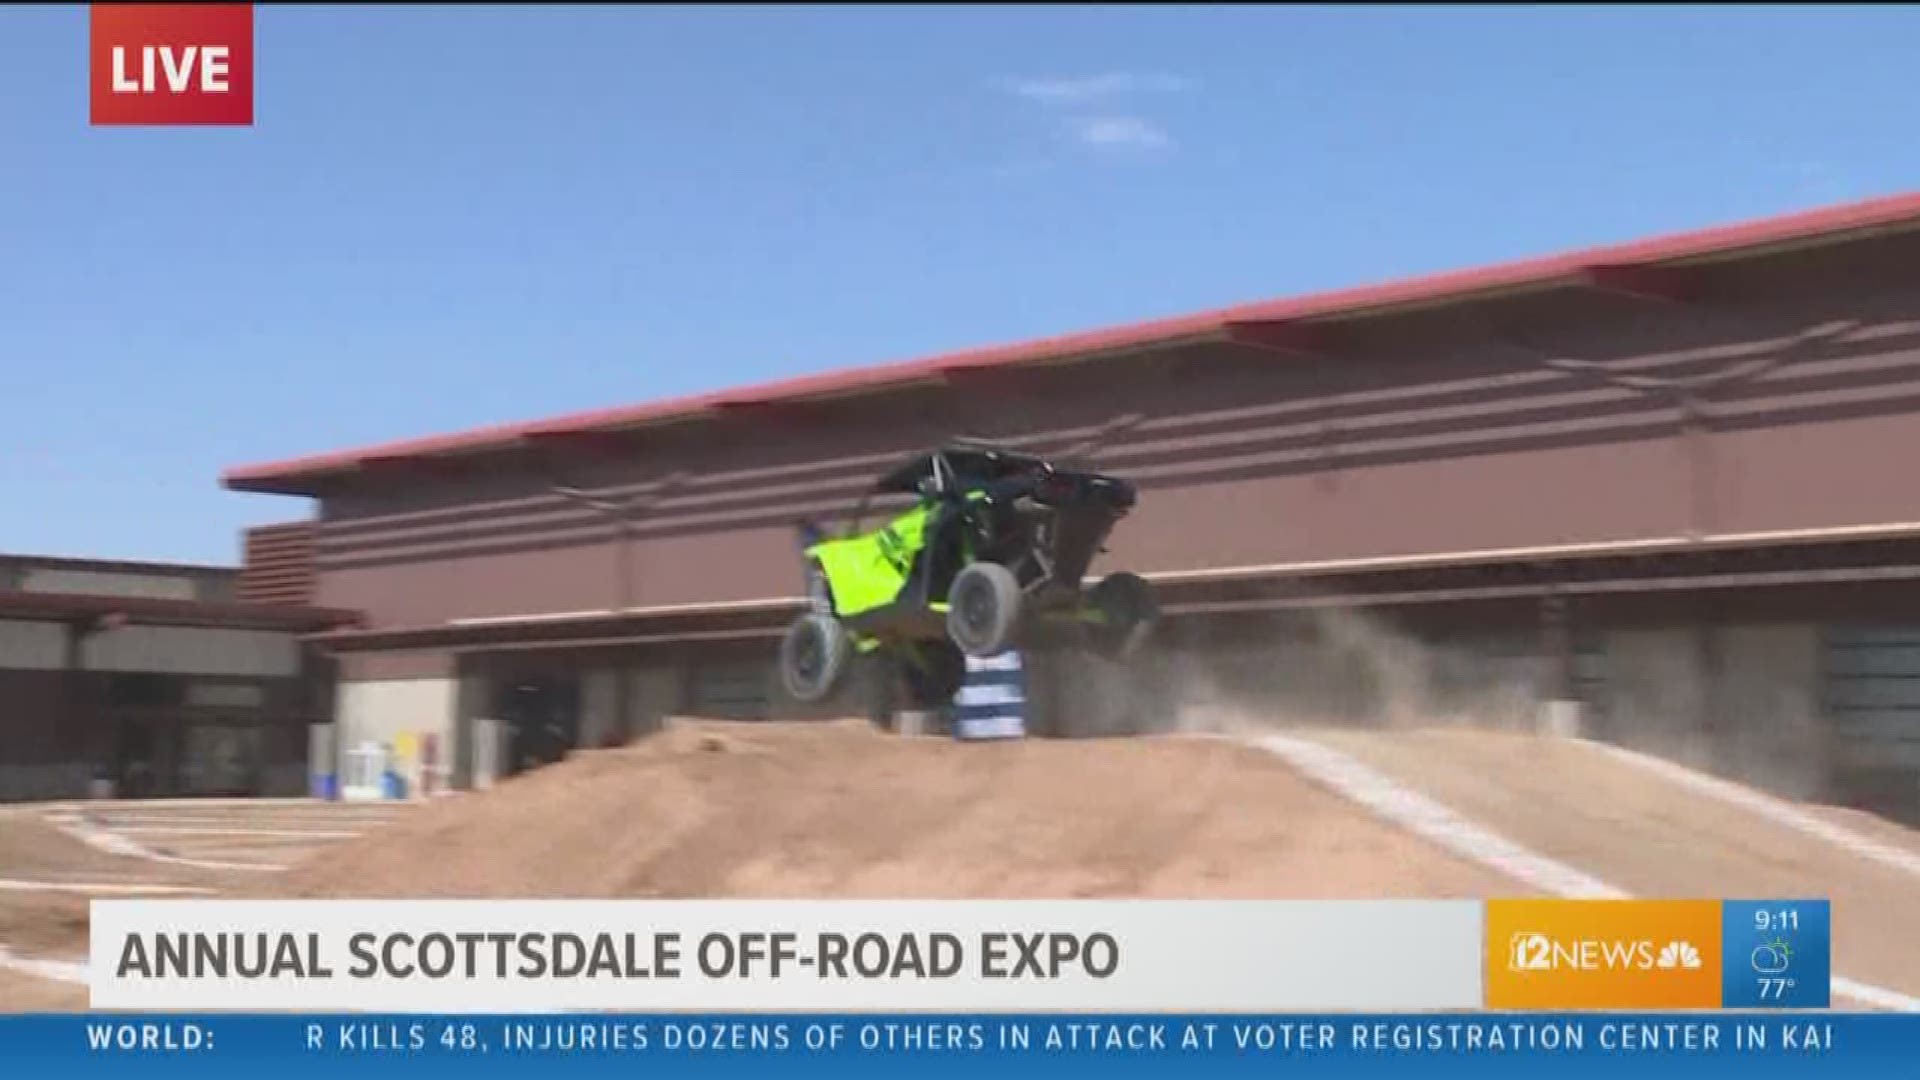 Monica Garcia had the off-road experience at the Annual Scottsdale Off-Road Expo